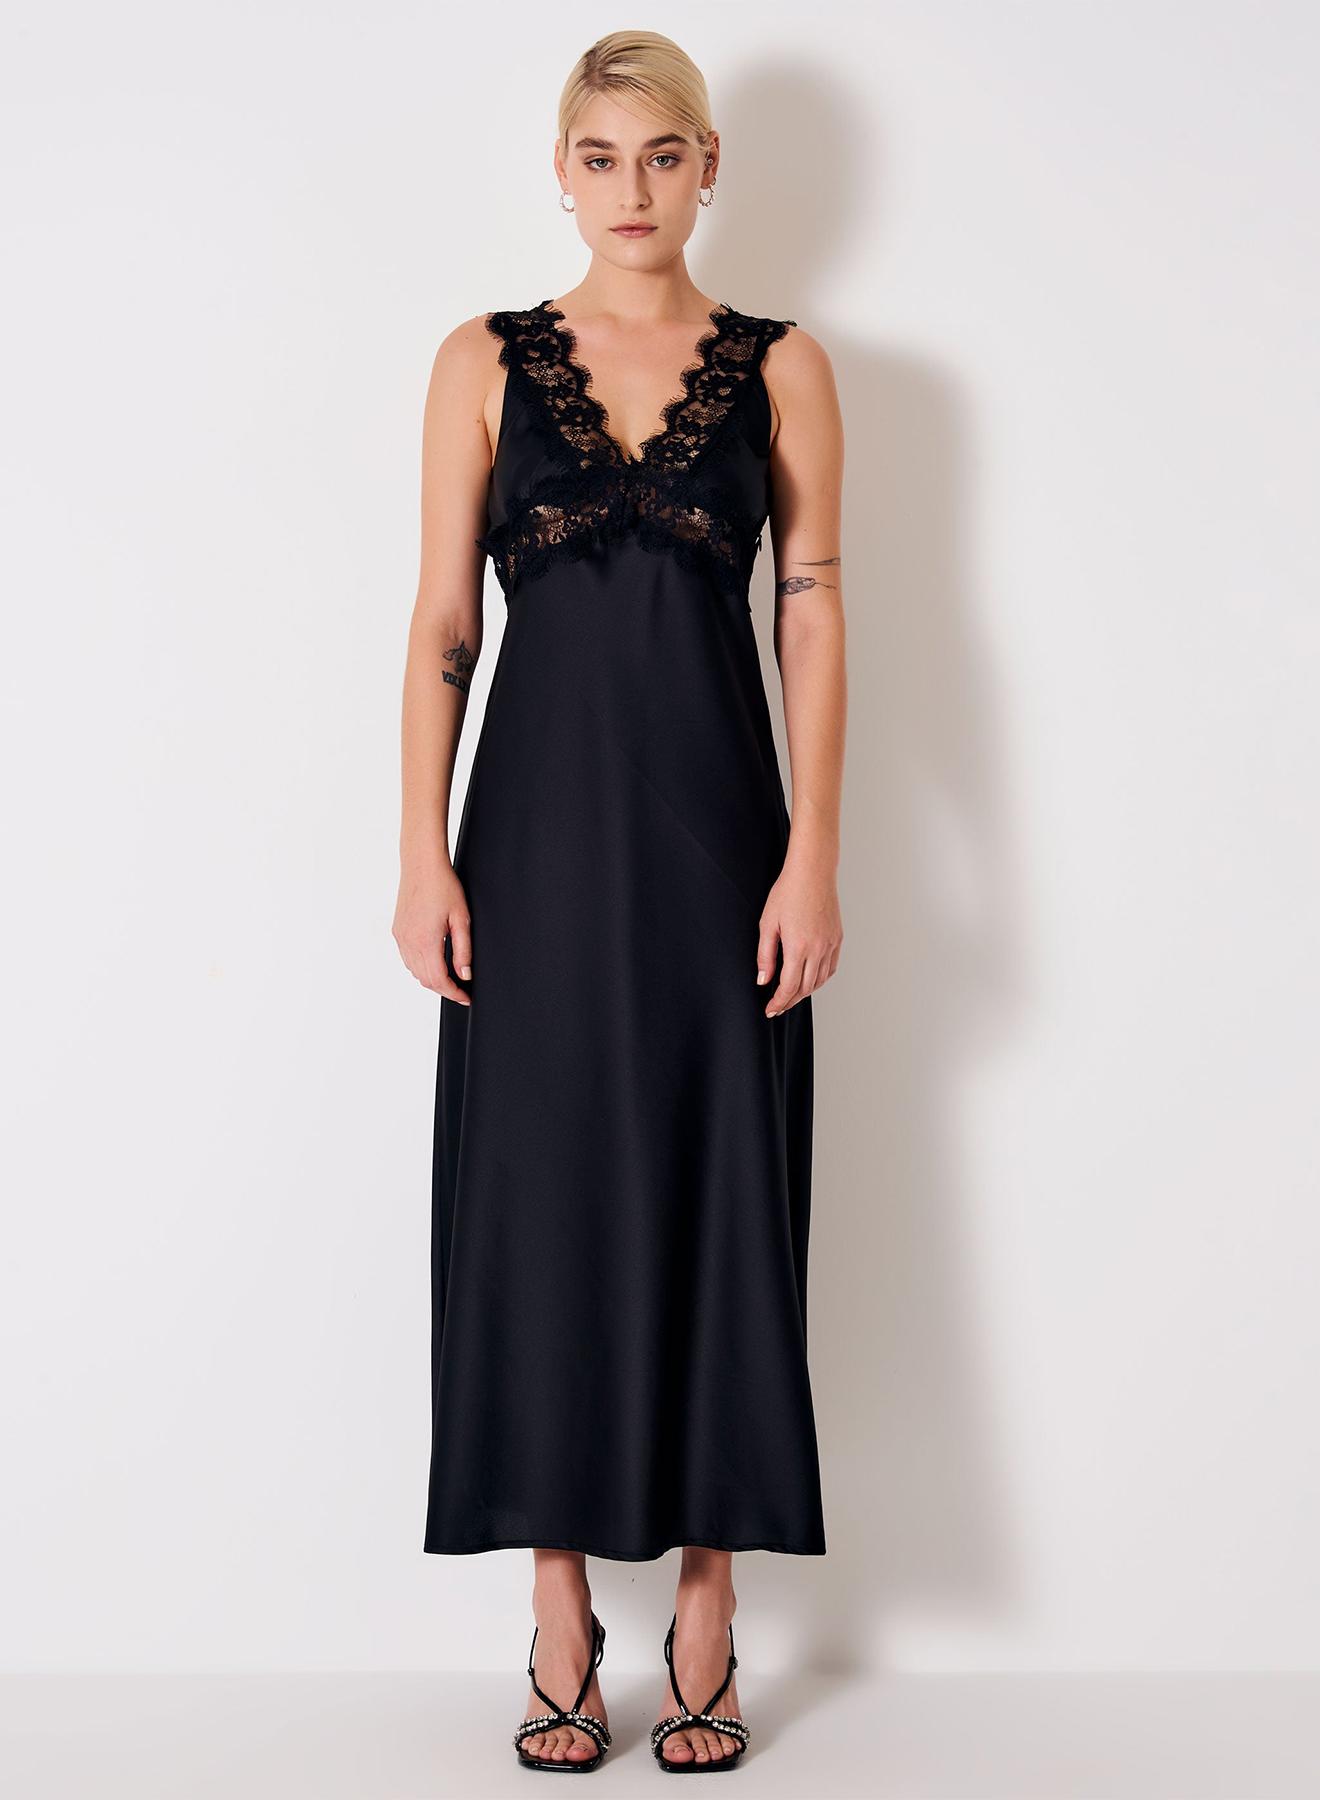 Long Satin Dress with Lace Details - 2